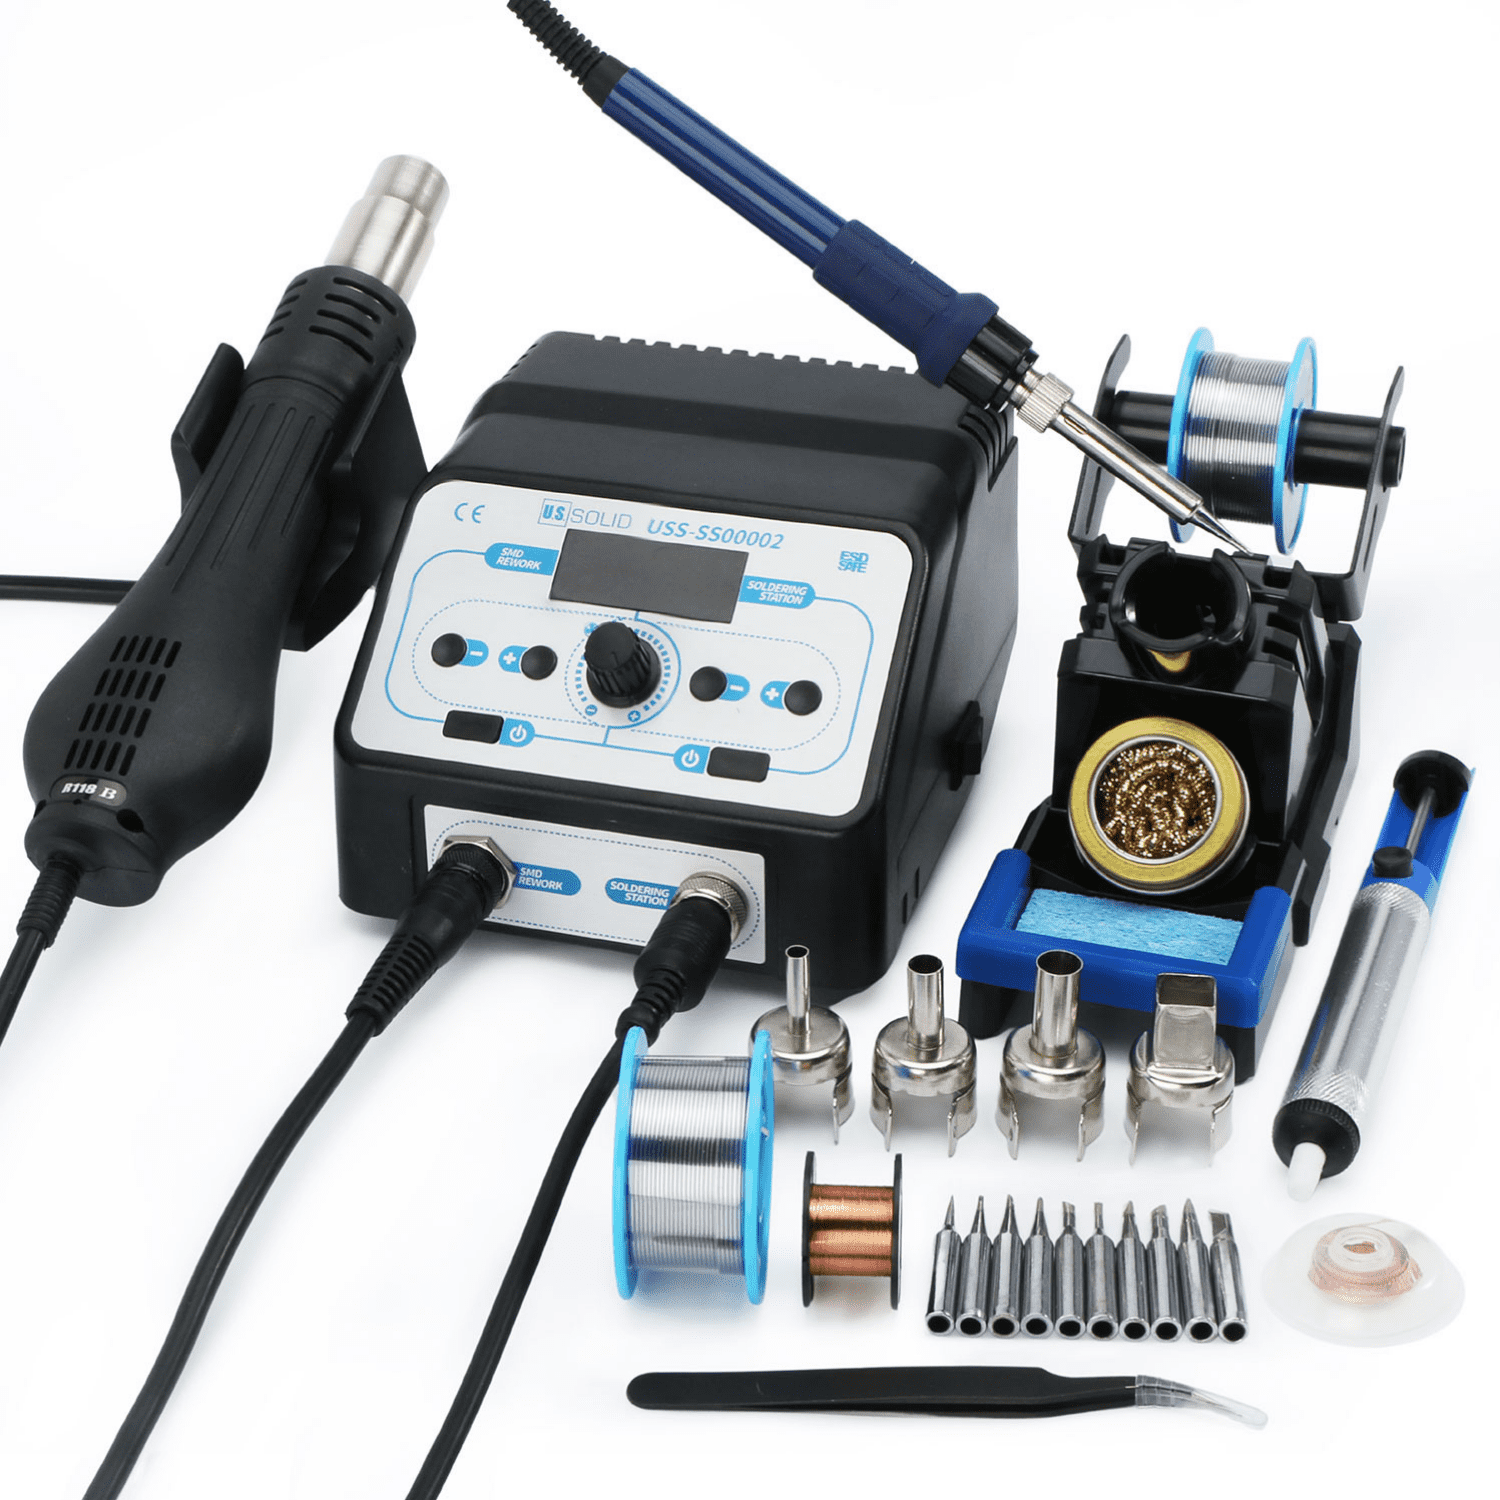 4 in 1 Dual Digital Soldering Iron & Hot Air Station Complete Kit 110V US 968A 